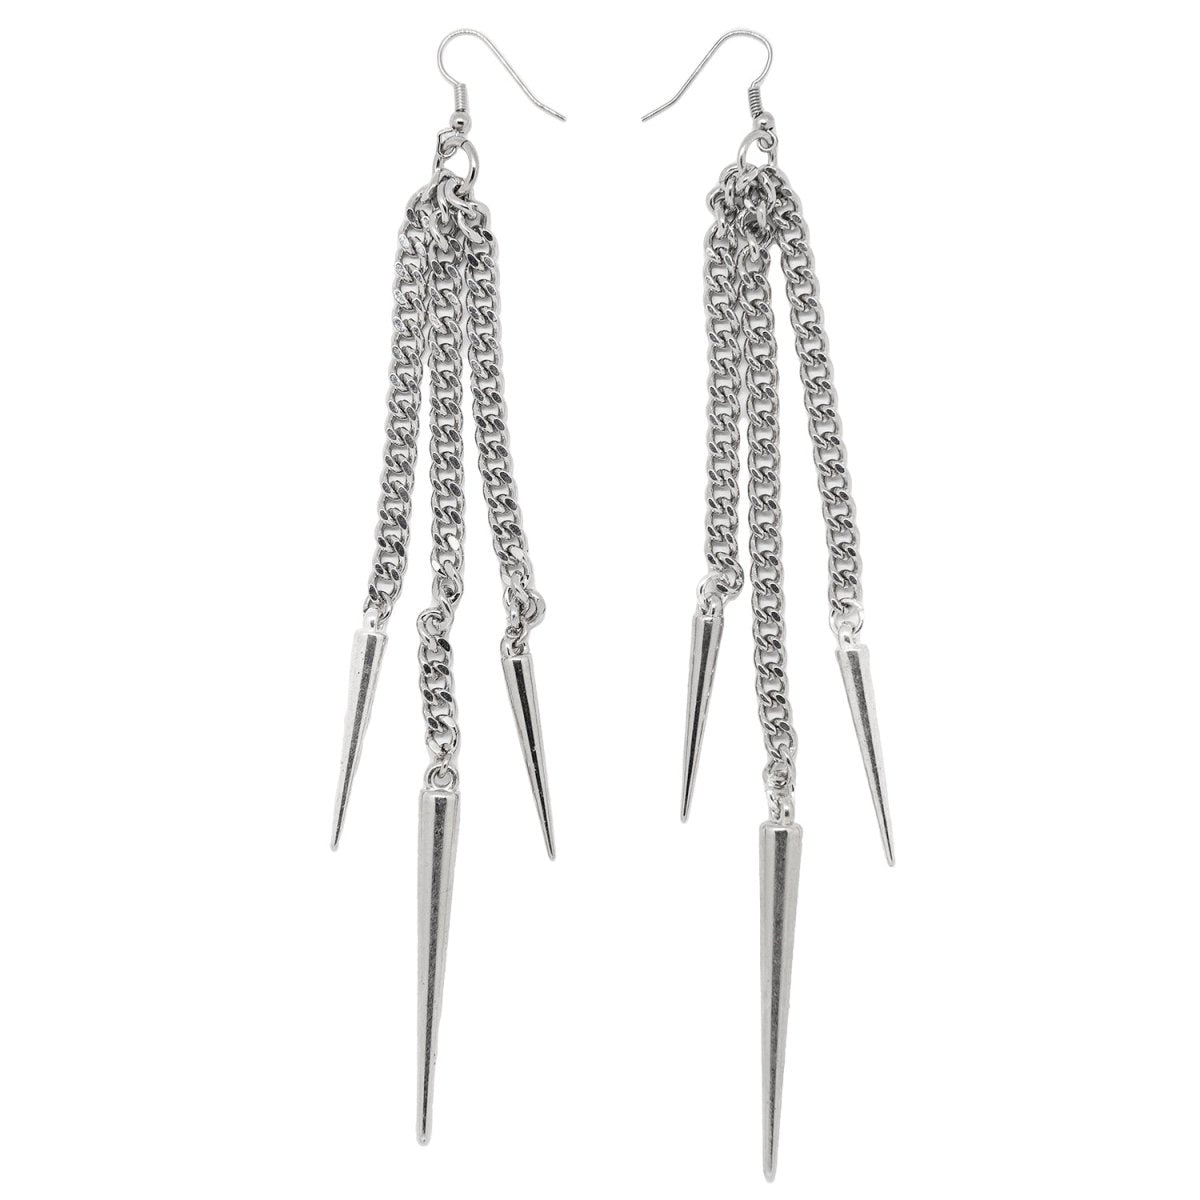 Too Fast | Switchblade Stiletto | Chain Spike Earrings